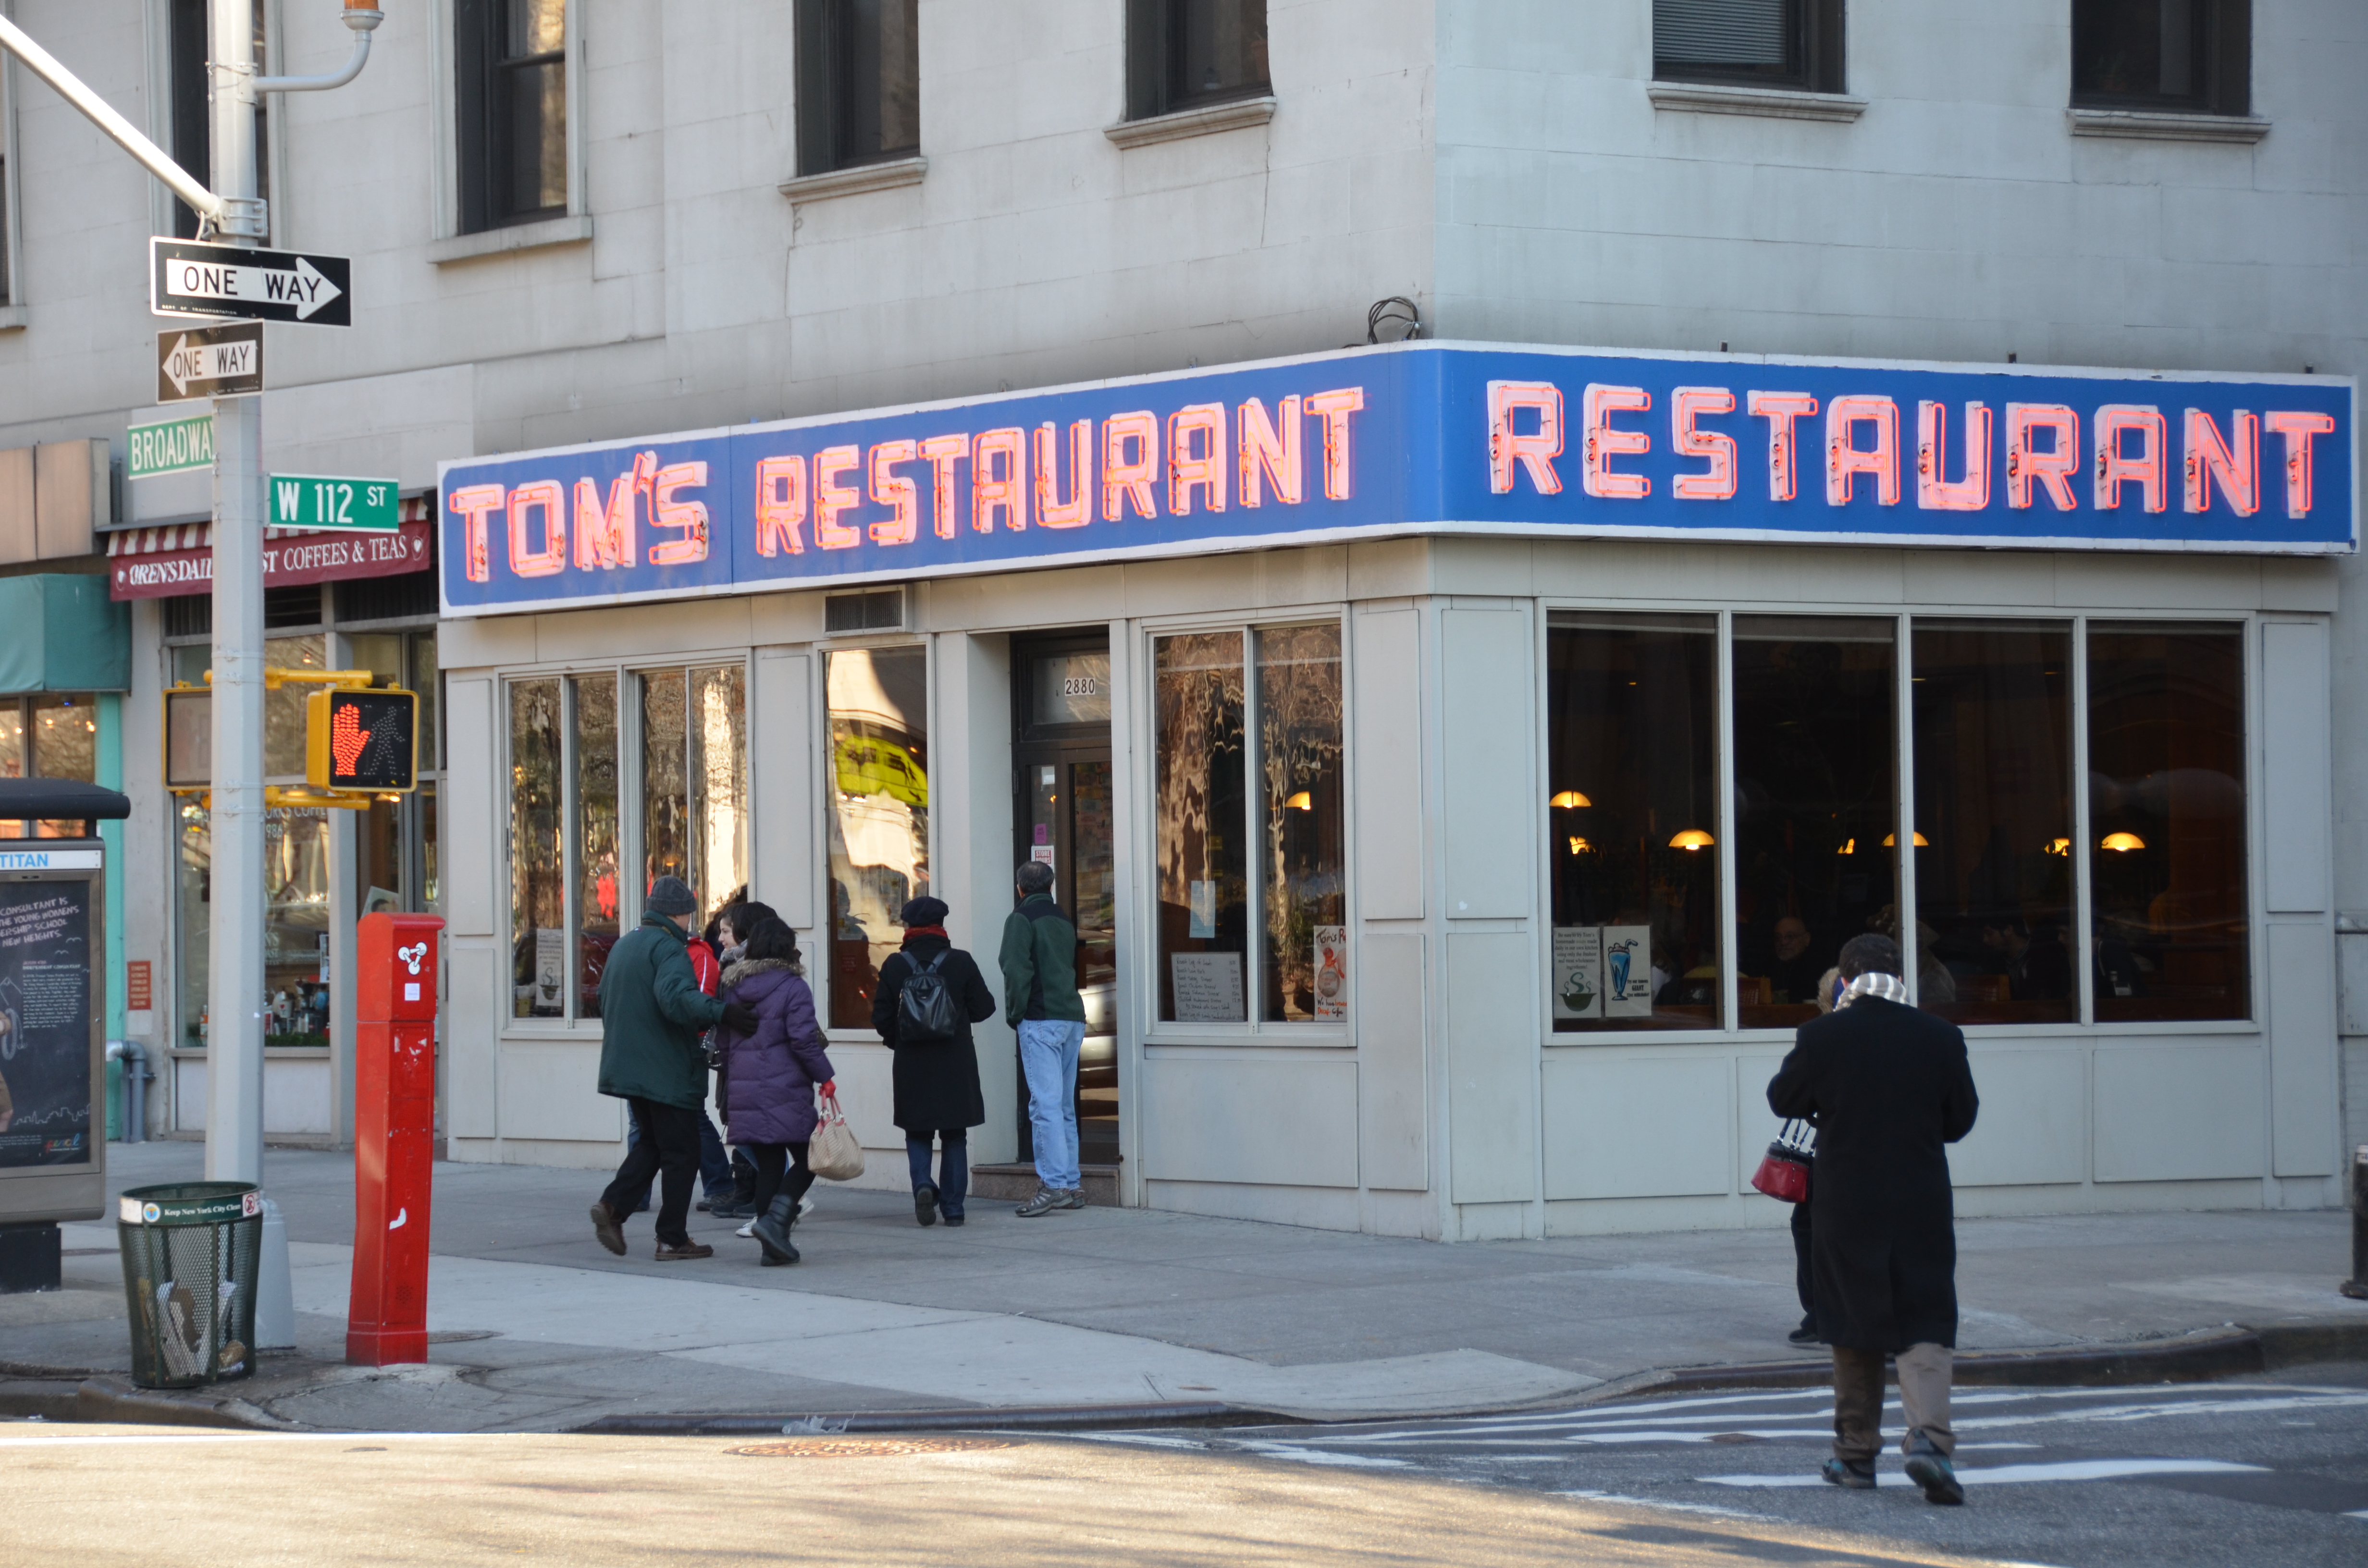 The real Tom's Diner (later known from Seinfeld) [Wikipedia] - Curious Minds